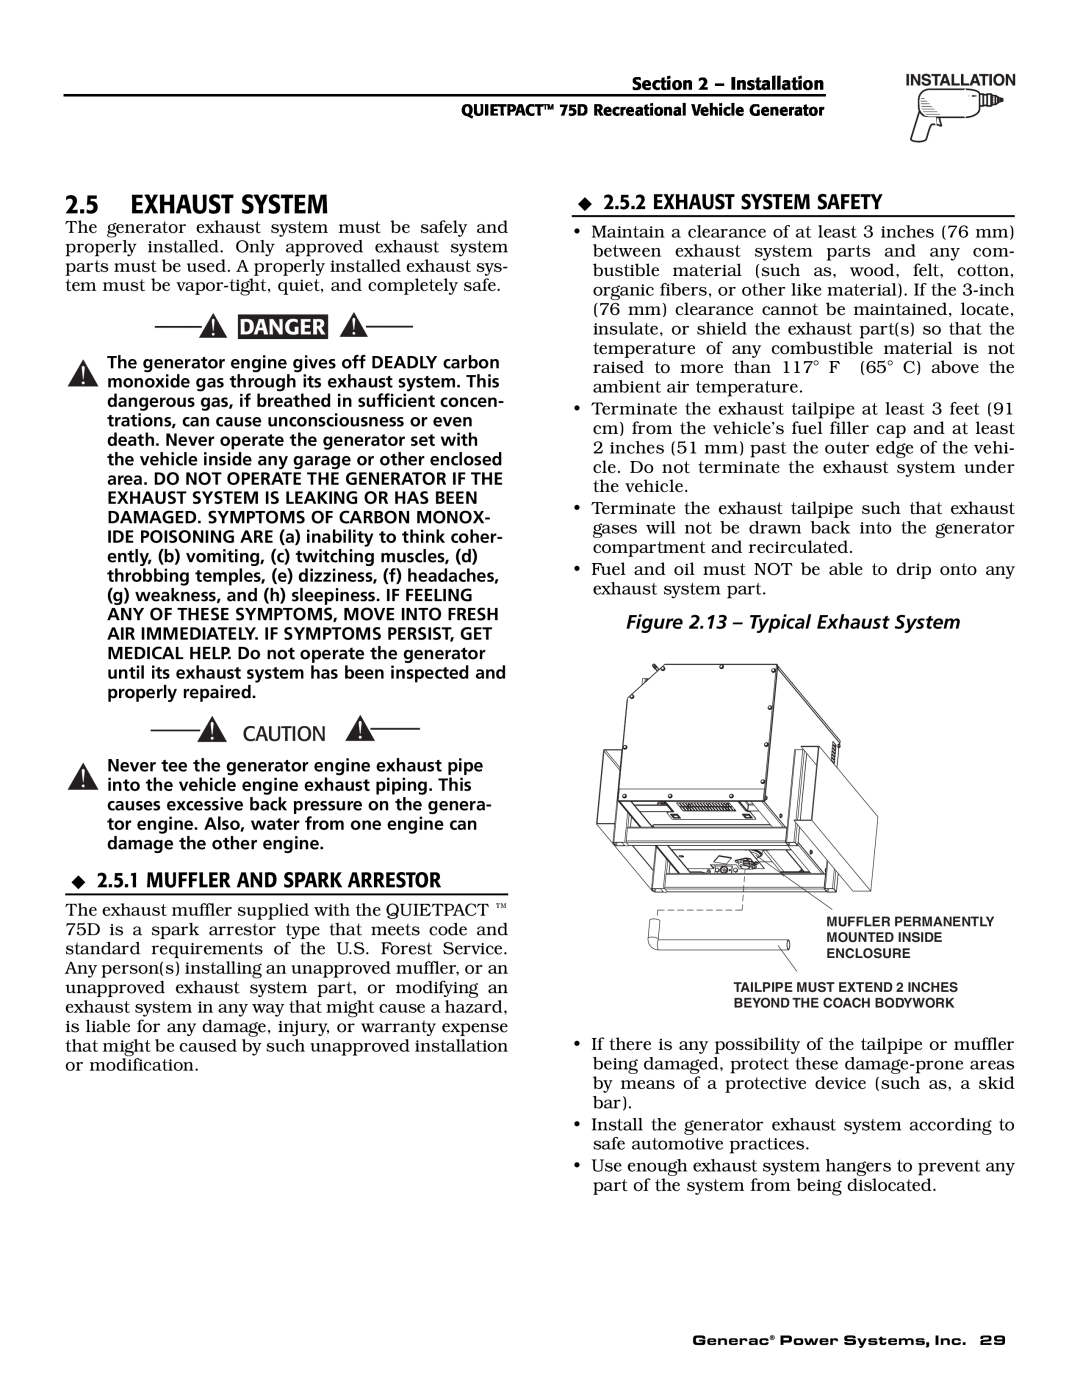 Guardian Technologies 004270-2 Exhaust System Safety, Muffler And Spark Arrestor, 13 - Typical Exhaust System, Danger 